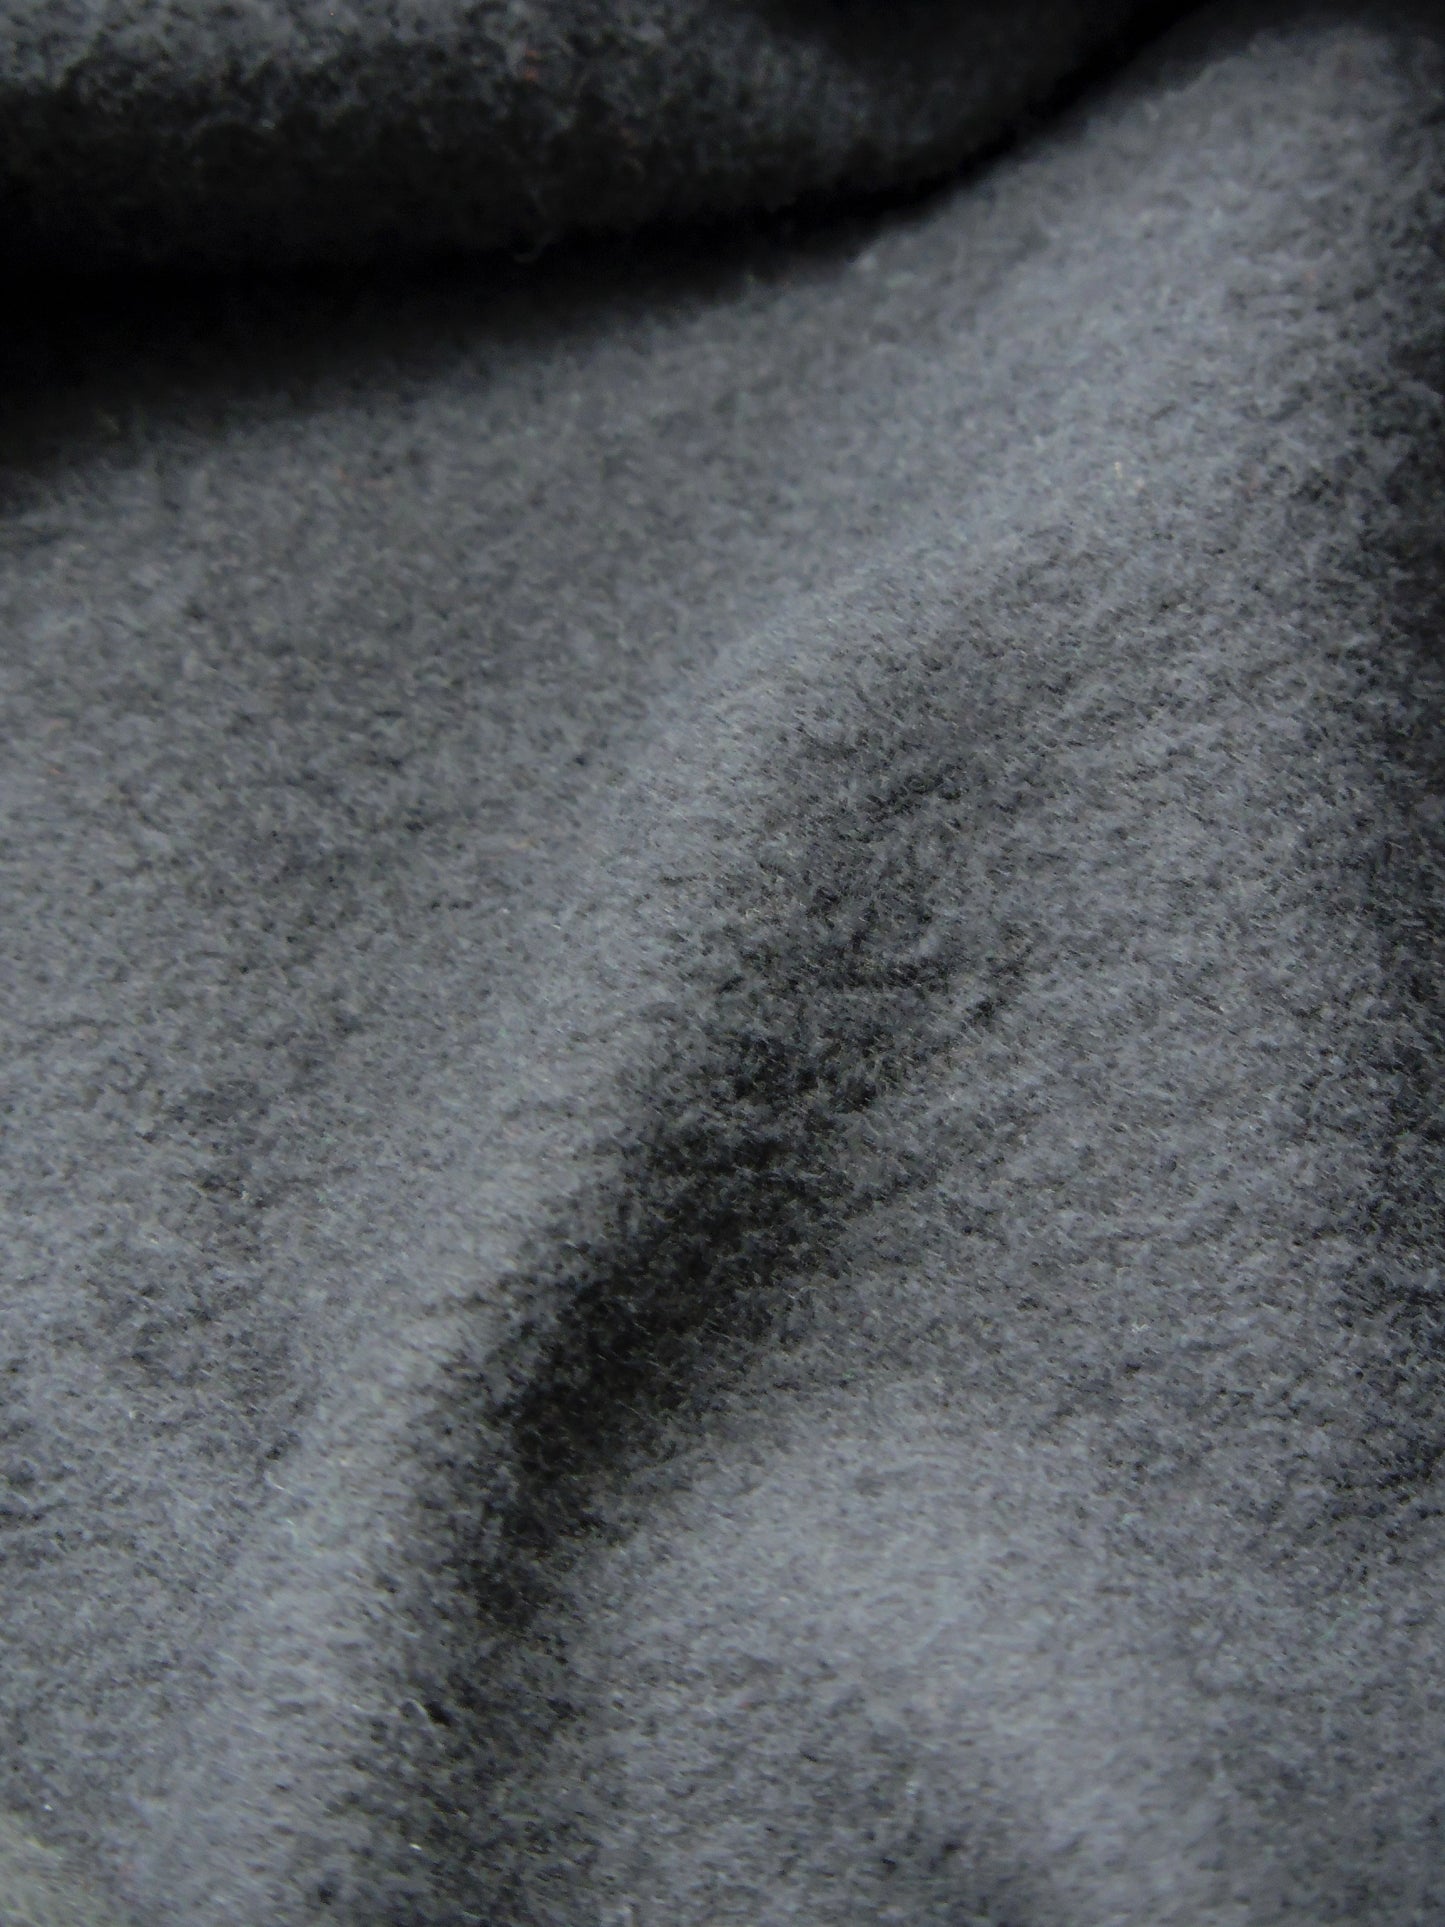 Extreme close up showing the microscopic fluff of fleece material.